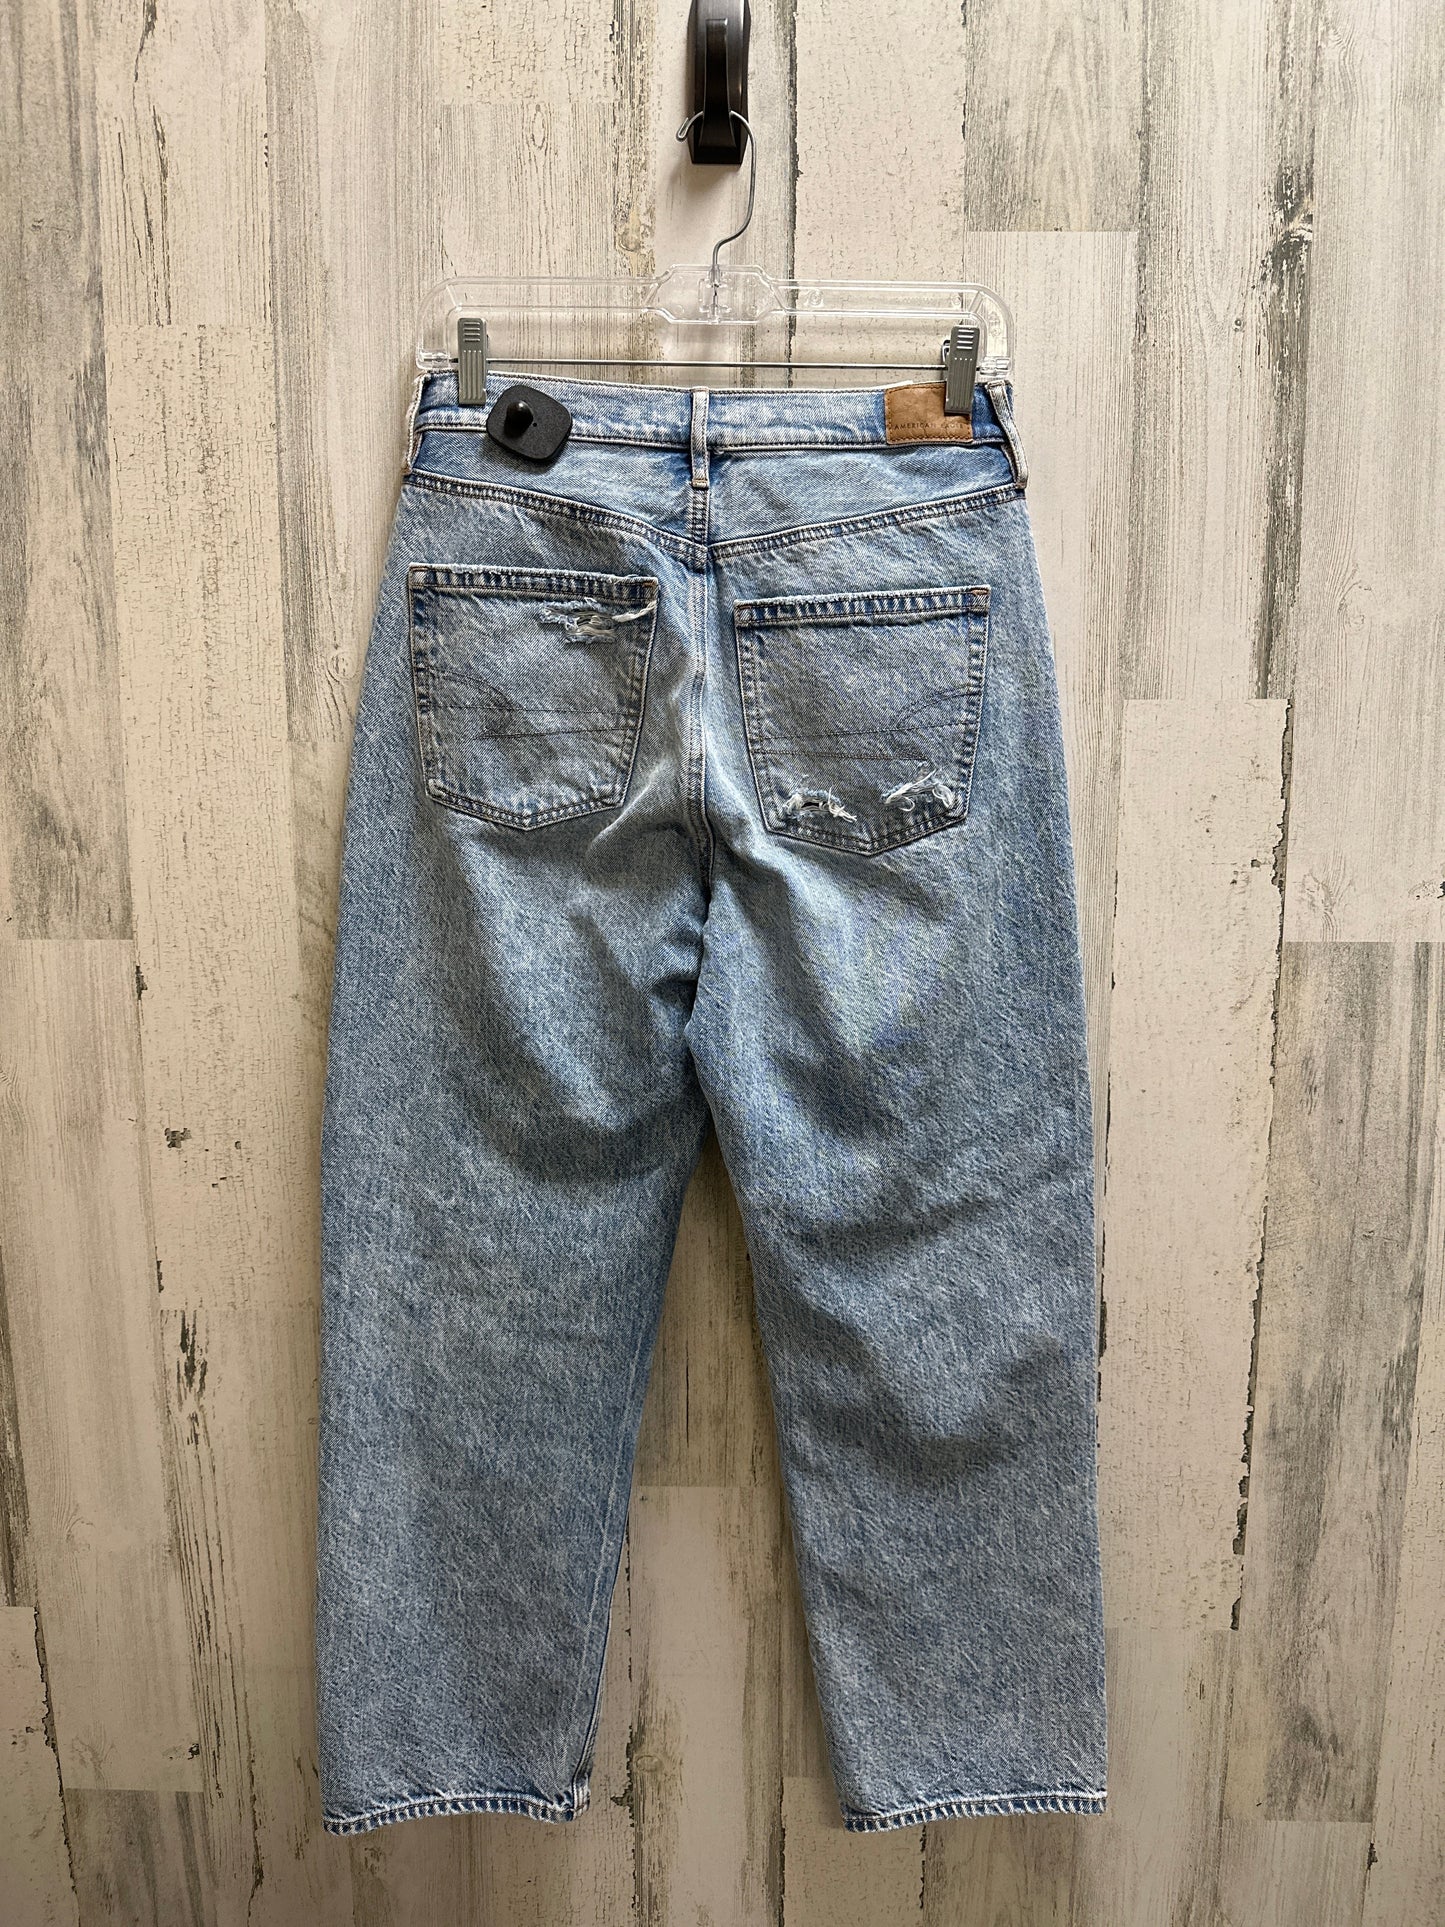 Jeans Relaxed/boyfriend By American Eagle  Size: 4